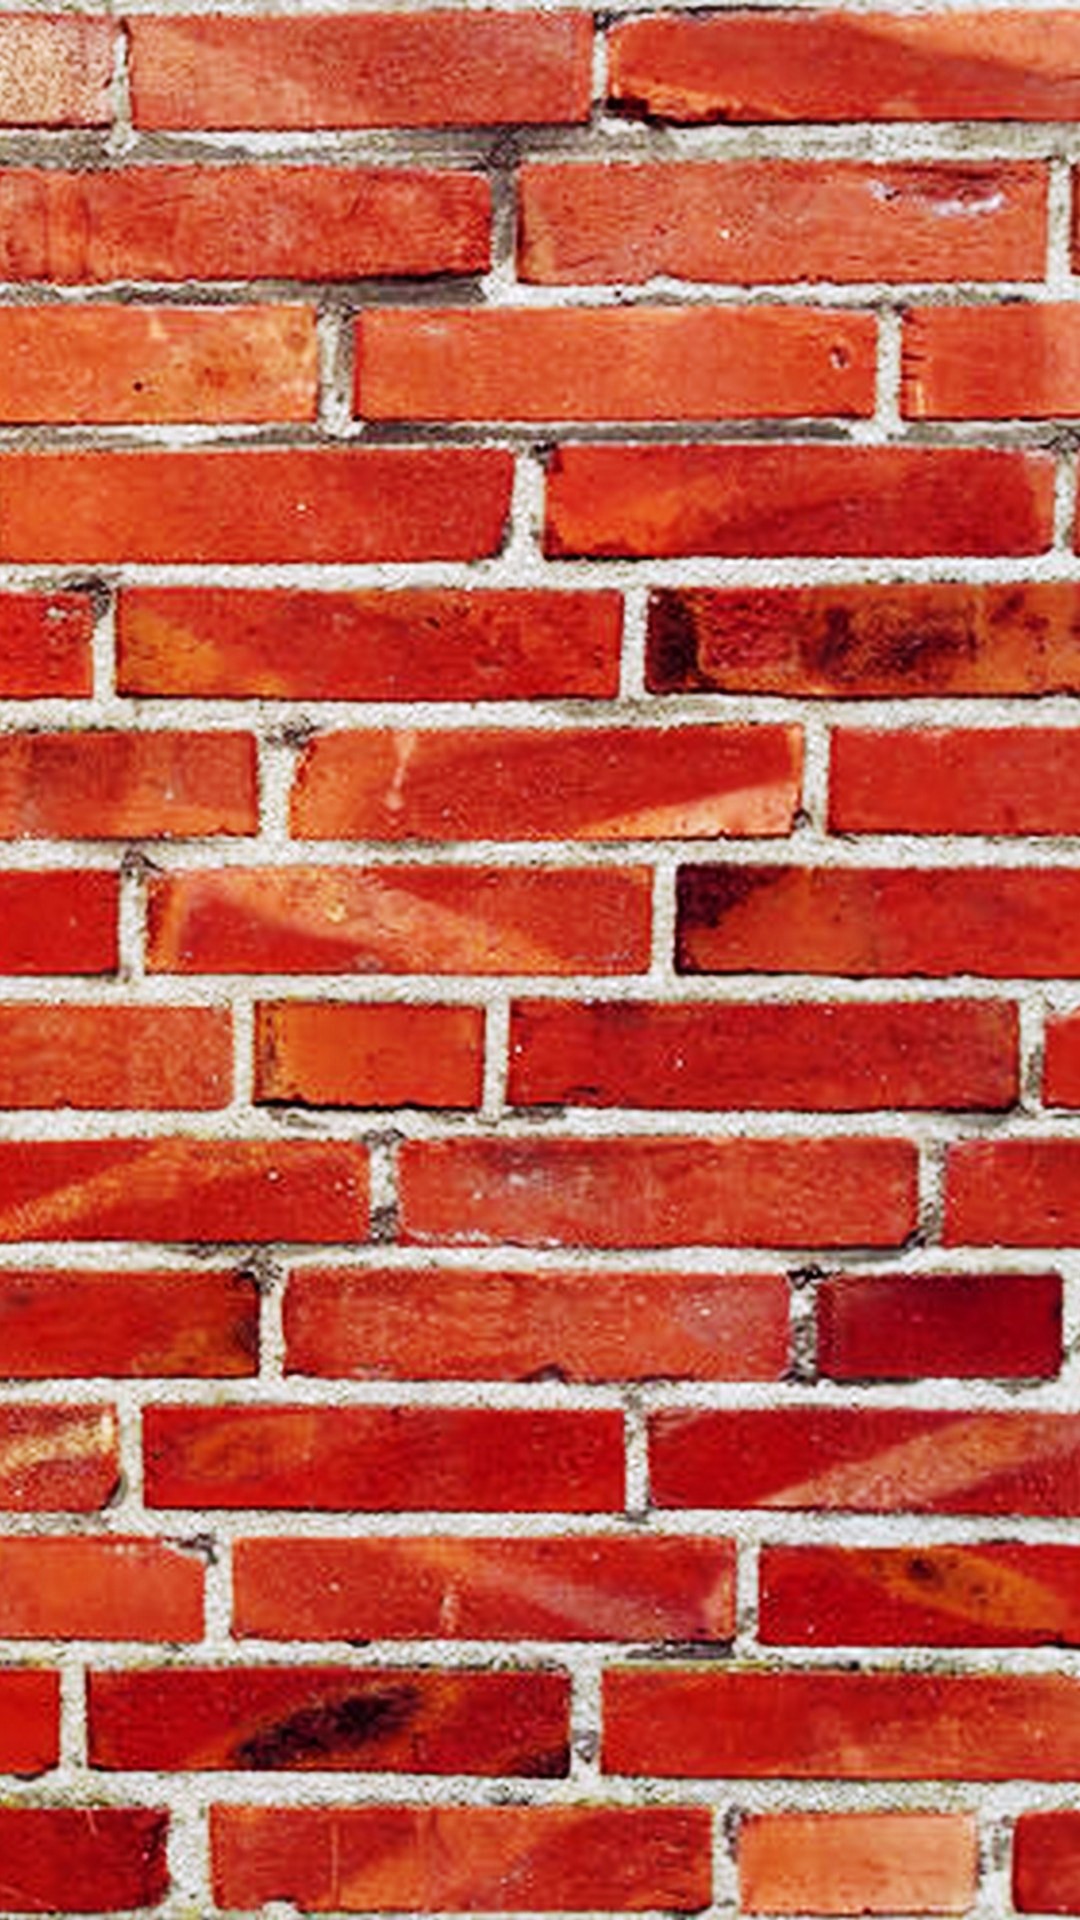 Brick Wallpaper For iPhone With high-resolution 1080X1920 pixel. You can use this wallpaper for your iPhone 5, 6, 7, 8, X, XS, XR backgrounds, Mobile Screensaver, or iPad Lock Screen